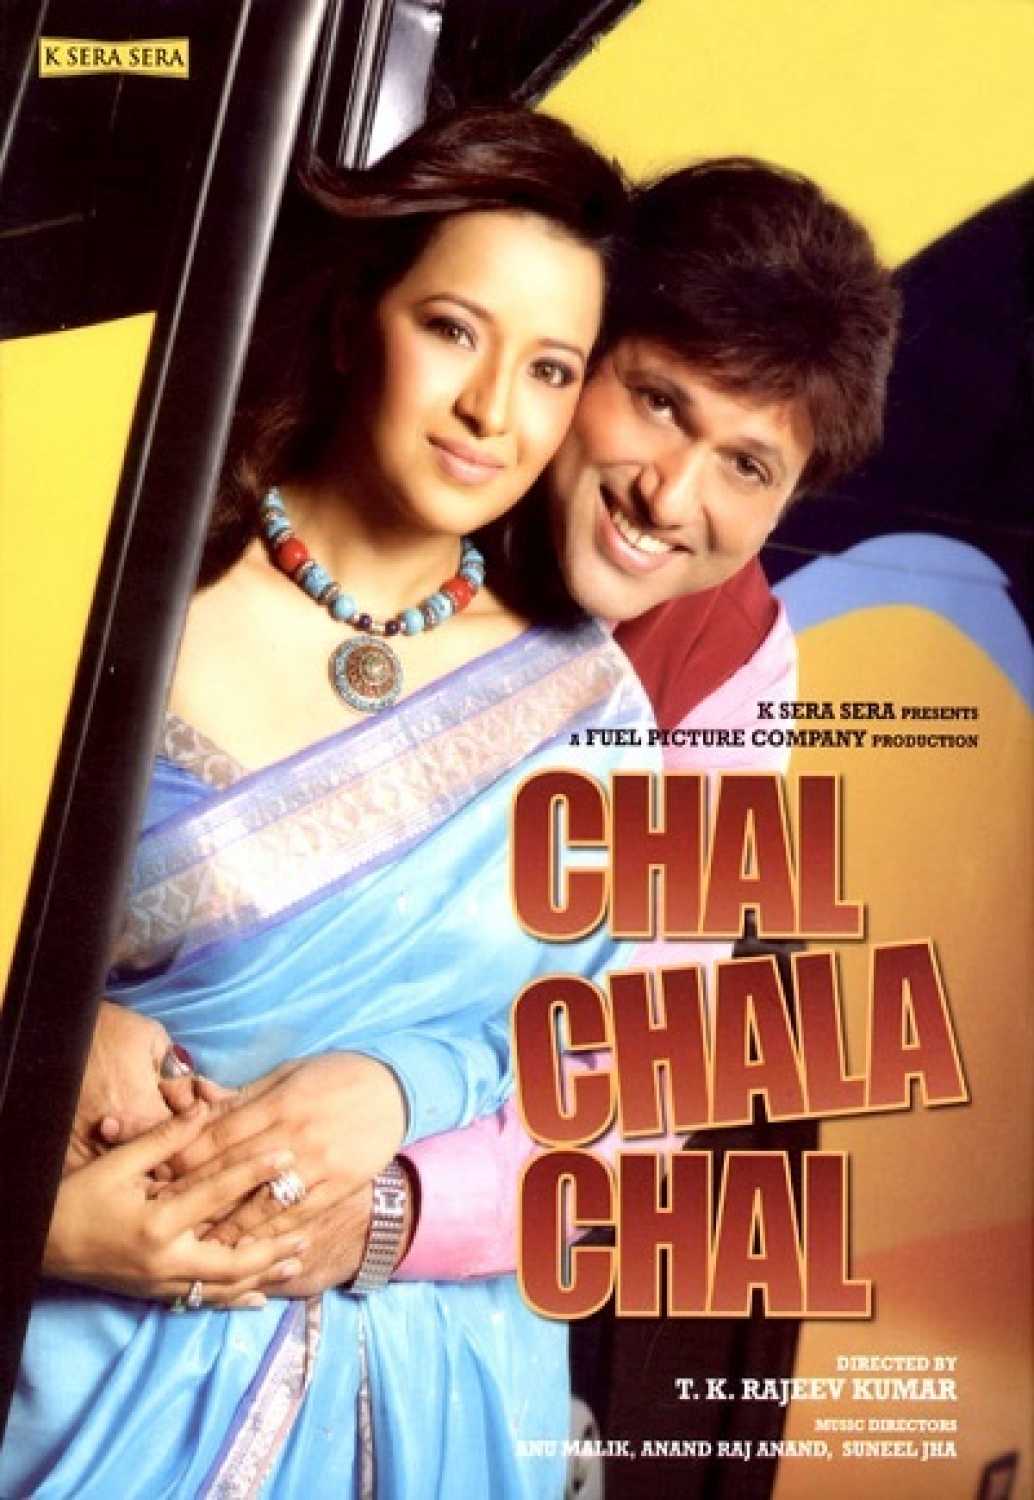 Poster for the movie "Chal Chala Chal"